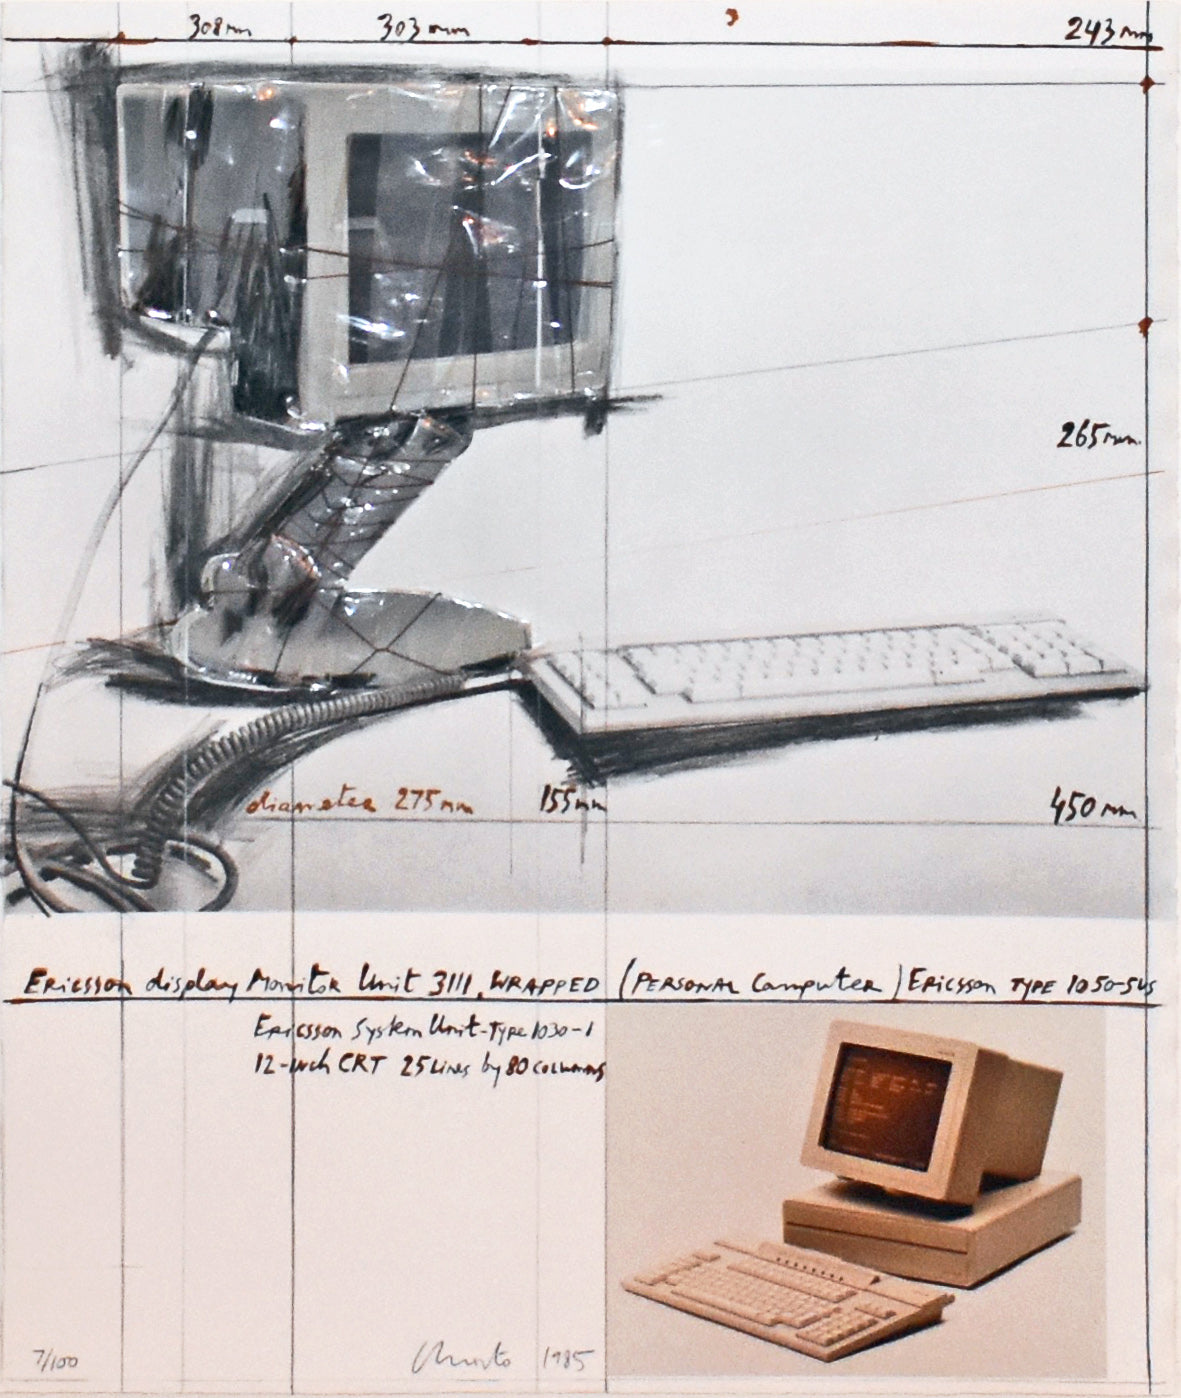 Christo and Jeanne-Claude Ericsson Display Monitor Unit 3111, Wrapped, Project for Personal Computer 1985